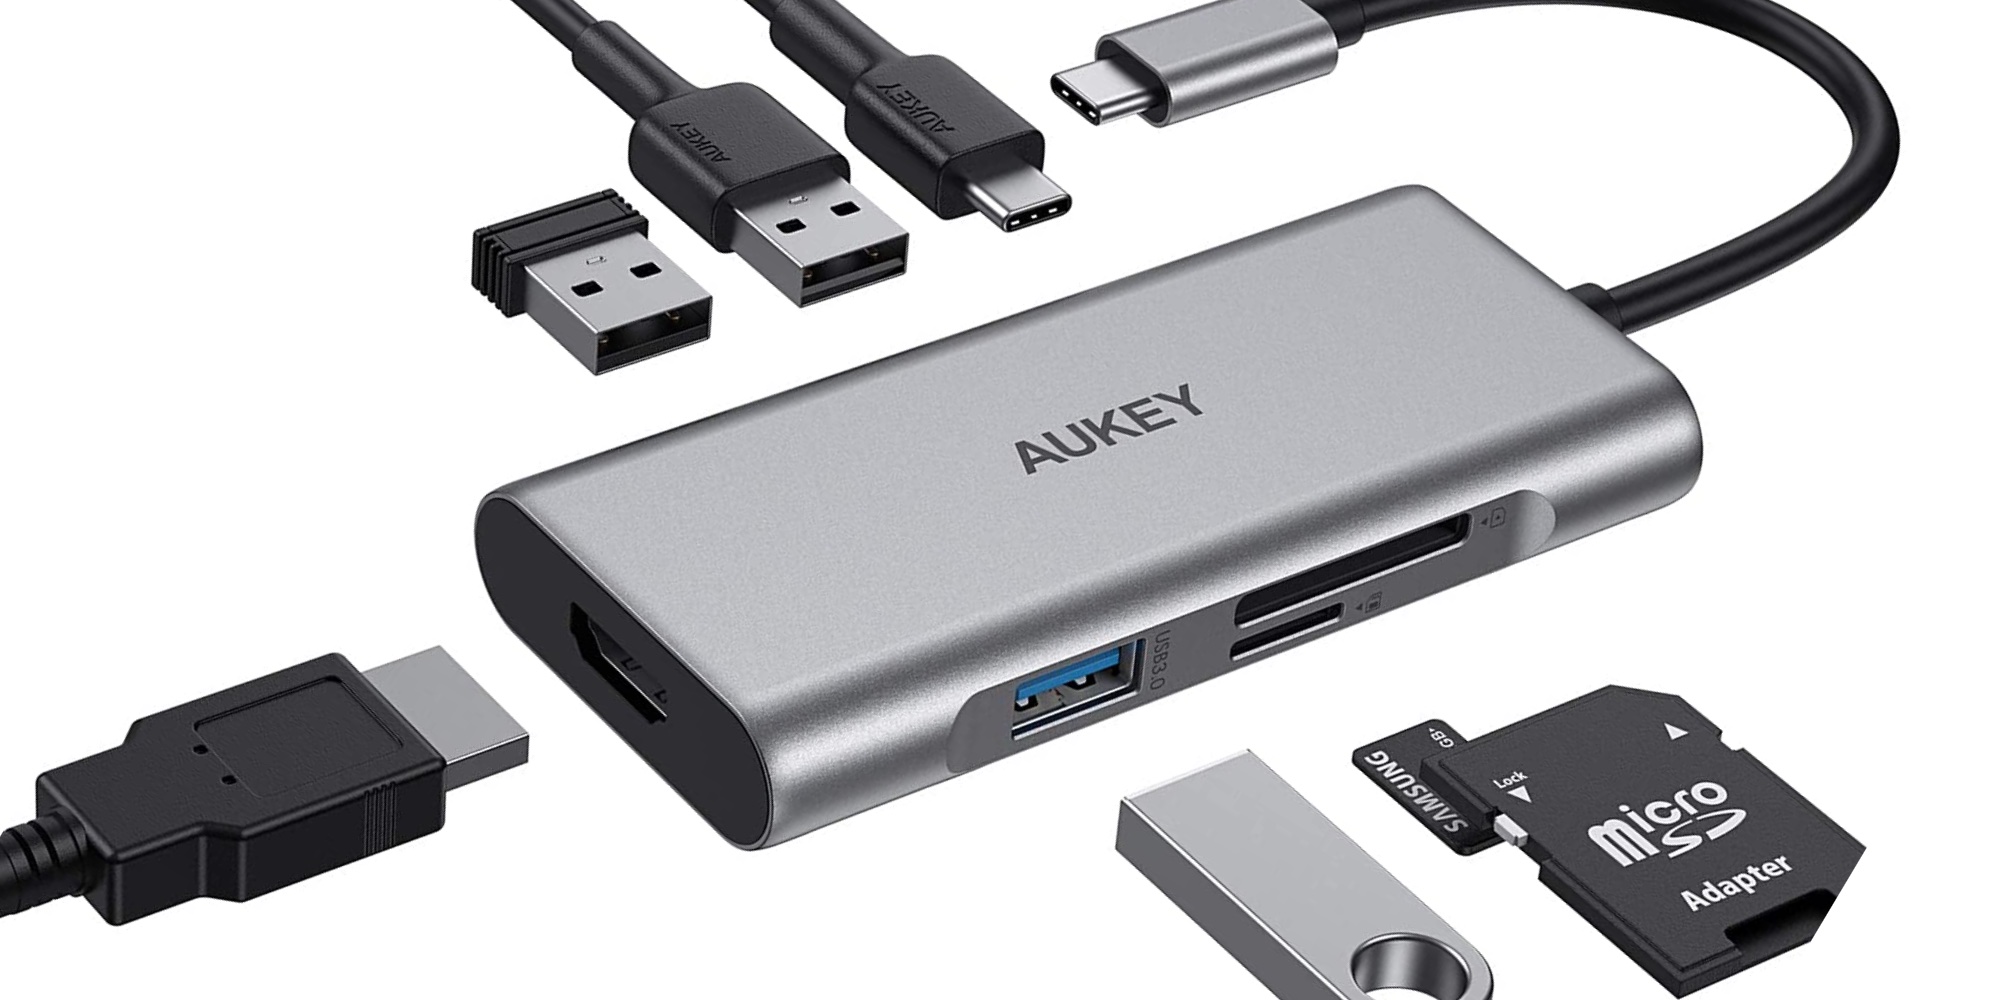 Clancy Talje Ærlighed Aukey's USB-C hub adds 7 ports to your Mac or Chromebook for $18 (Save 25%)